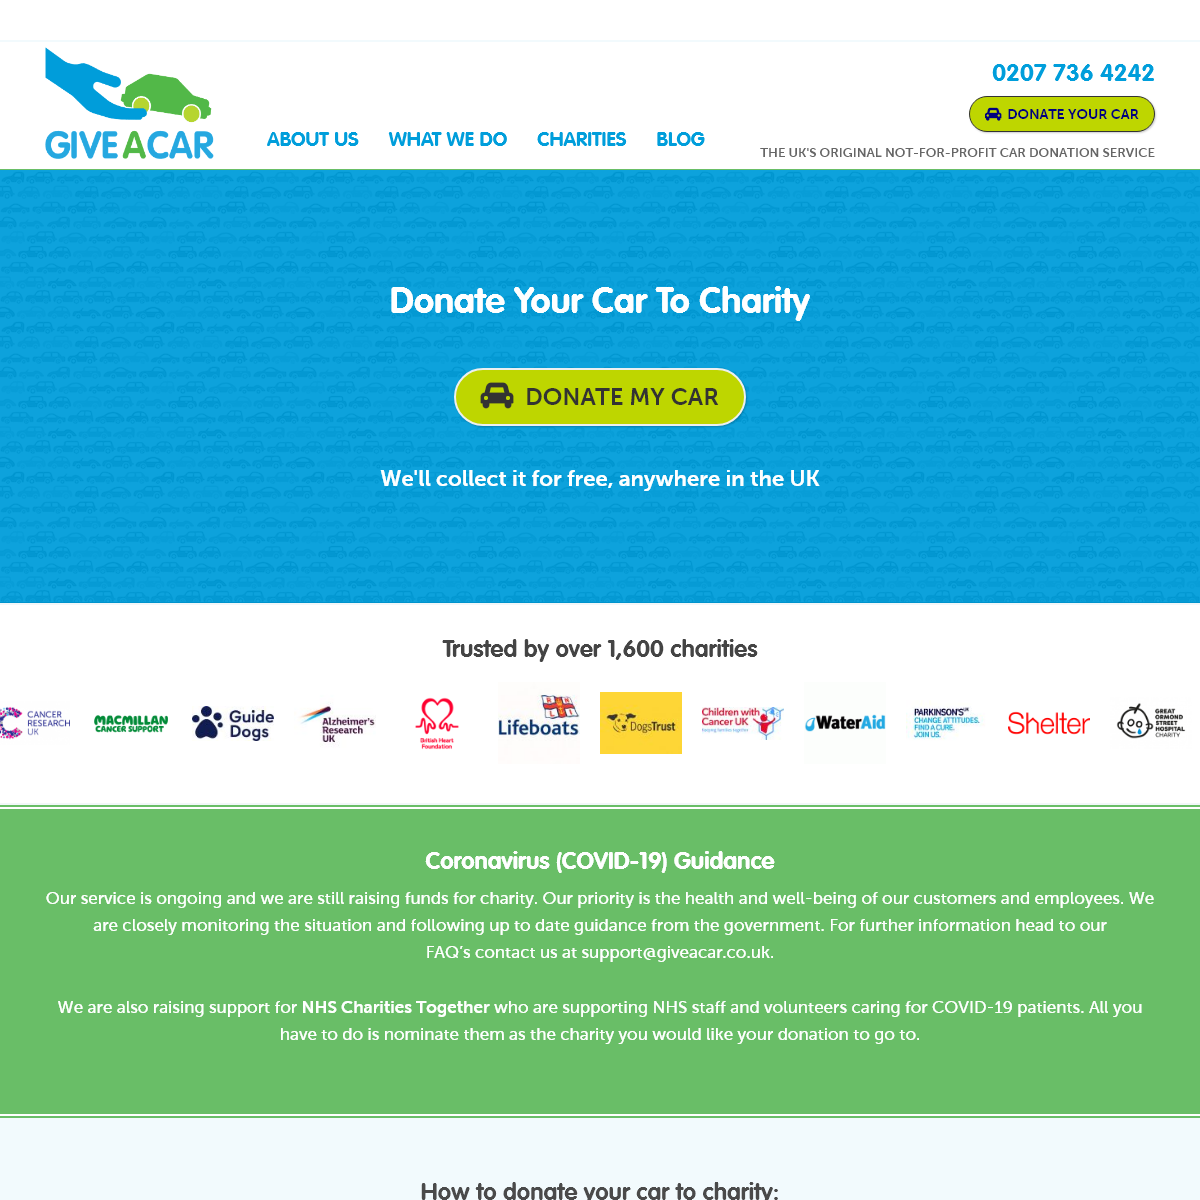 A complete backup of giveacar.co.uk